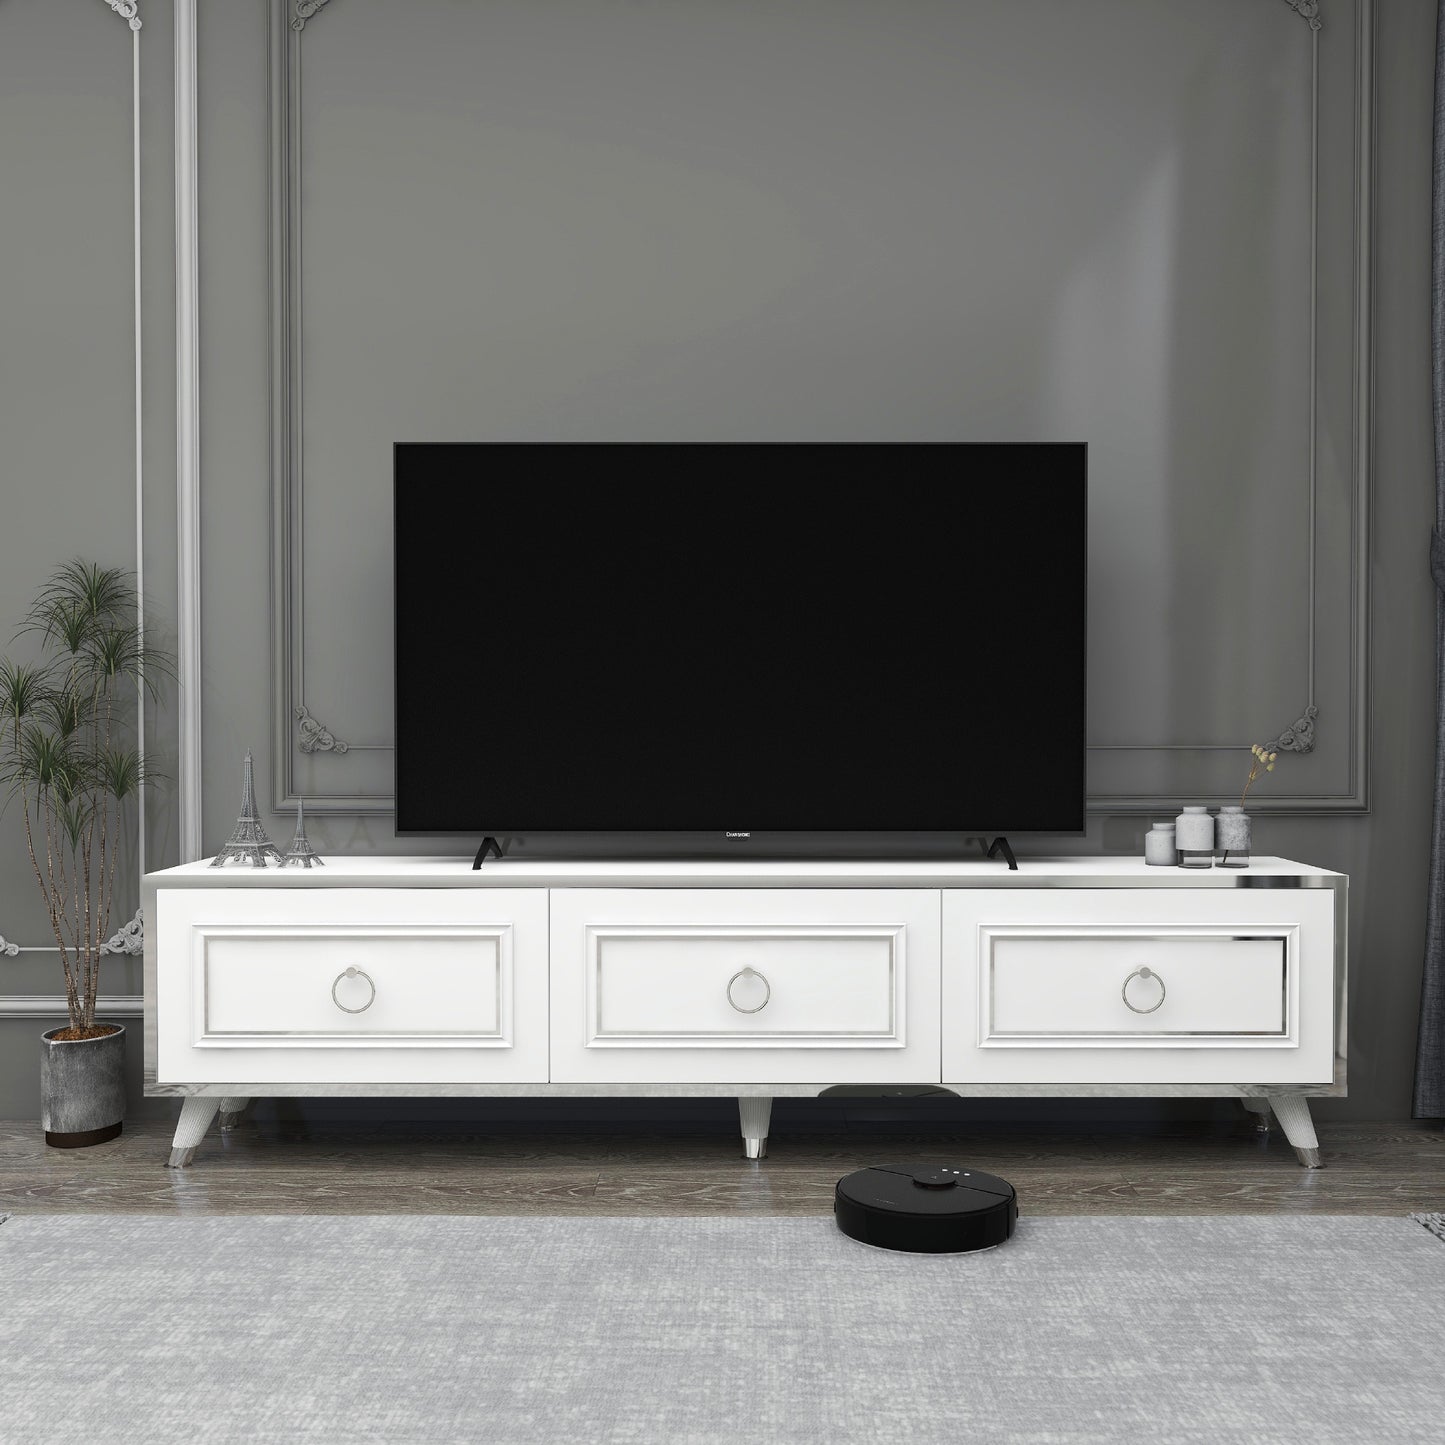 Esmera 180 cm Wide TV Stand and Media Console with Cabinets